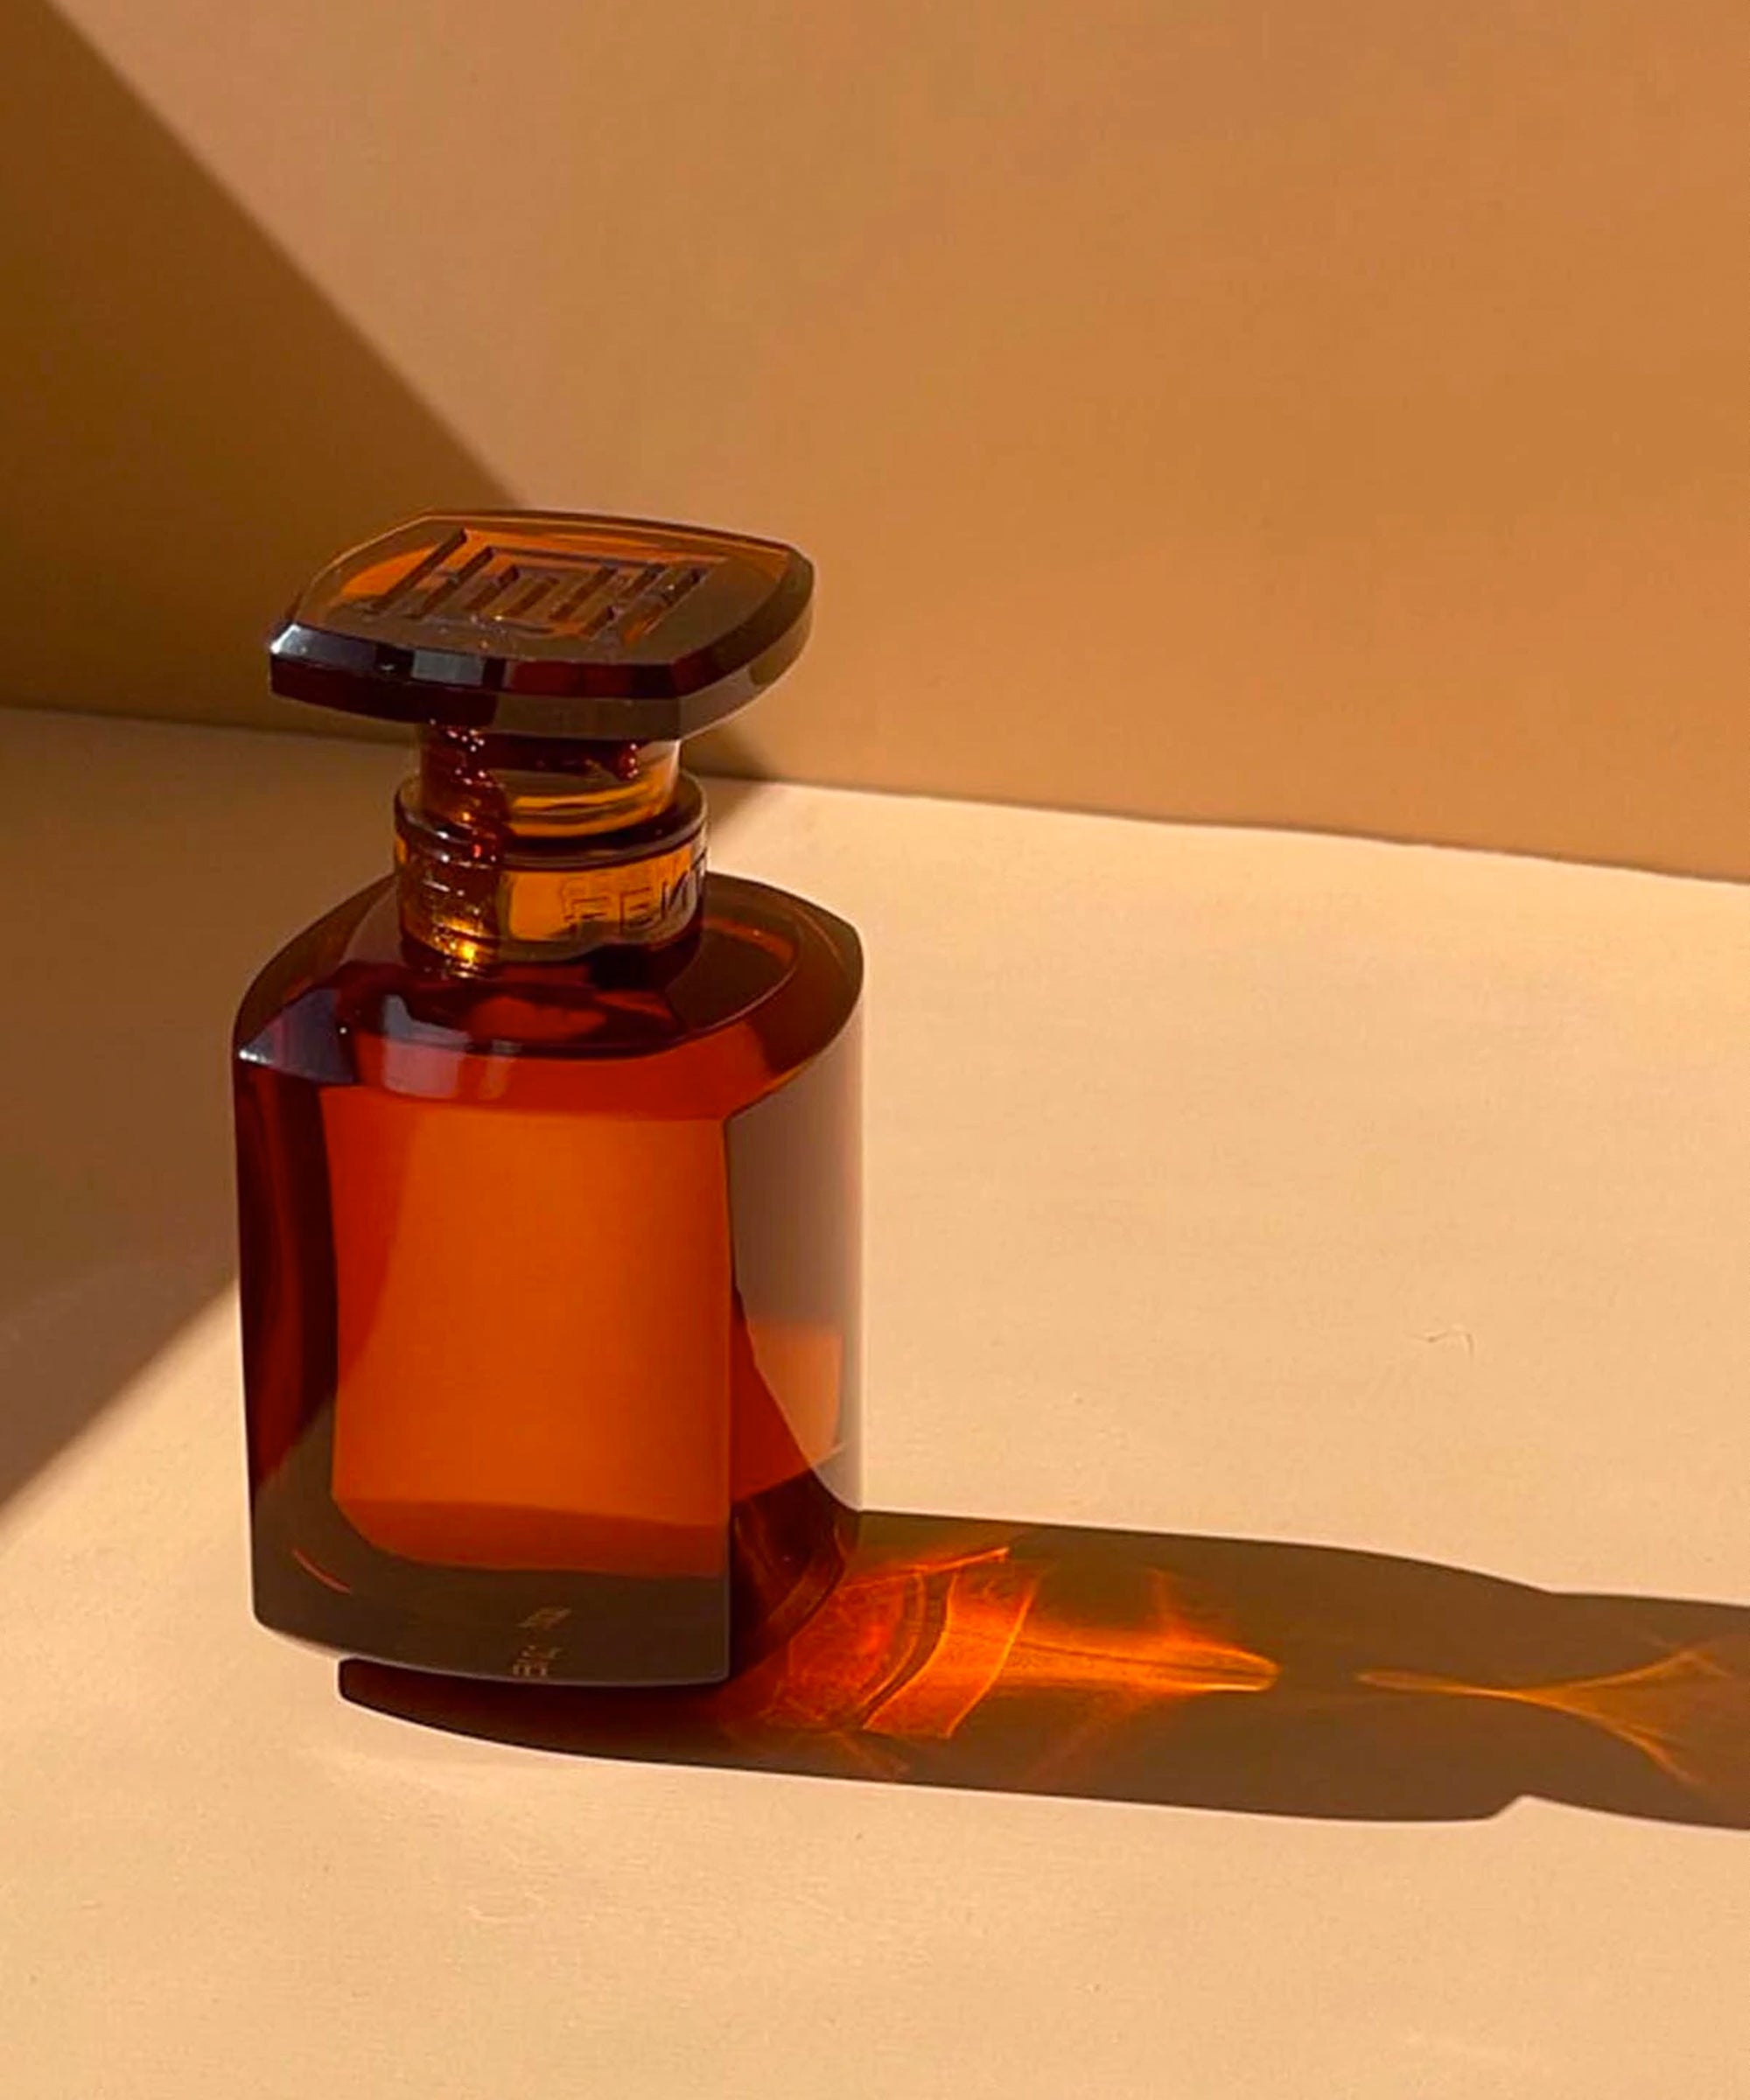 Louis Vuitton's 'City of Stars' Cologne Is An Ode To Sunsets And Celebrities